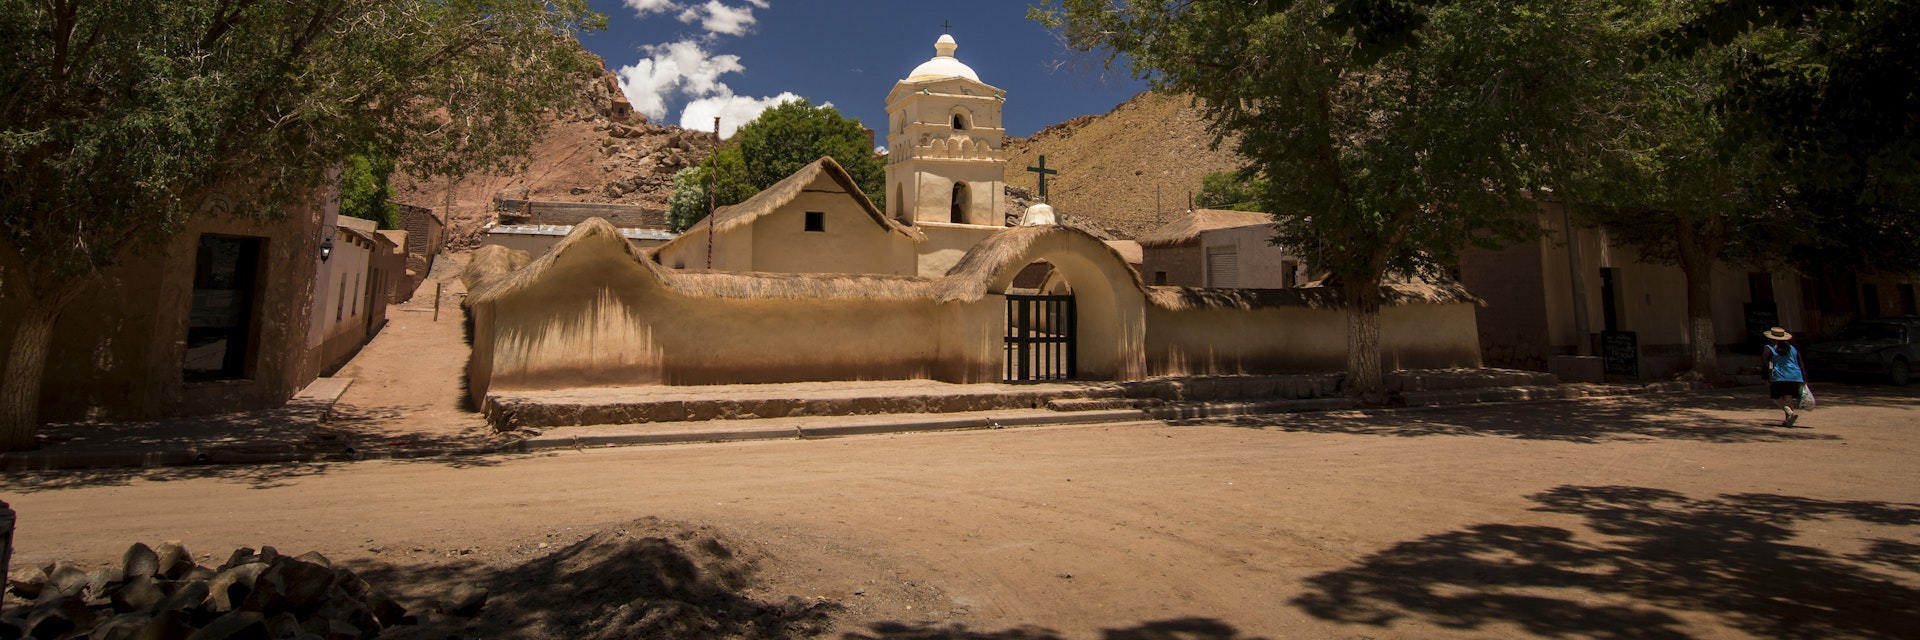 Historic adobe church in the little town of Susques, Argentina.